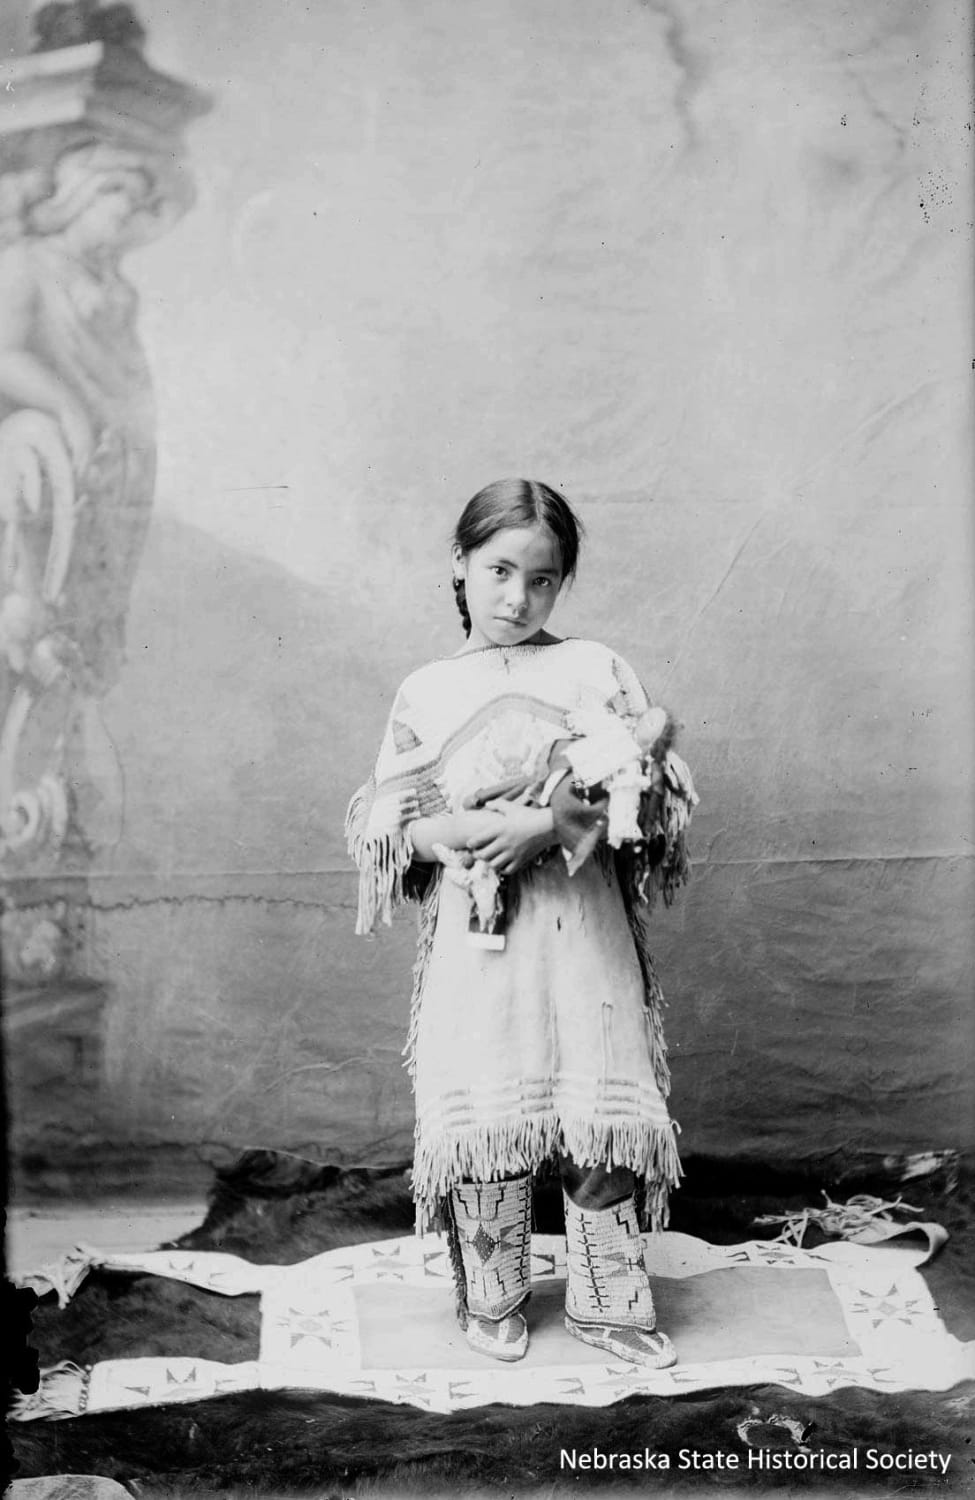 Katie Roubideaux of the Rosebud Sioux tribe with her doll. Katie was the daughter of Louis Roubideaux, a French/Lakota interpreter for the Rosebud Sioux Reservation, and his third wife, Adelia Blunt Arrow - 1890